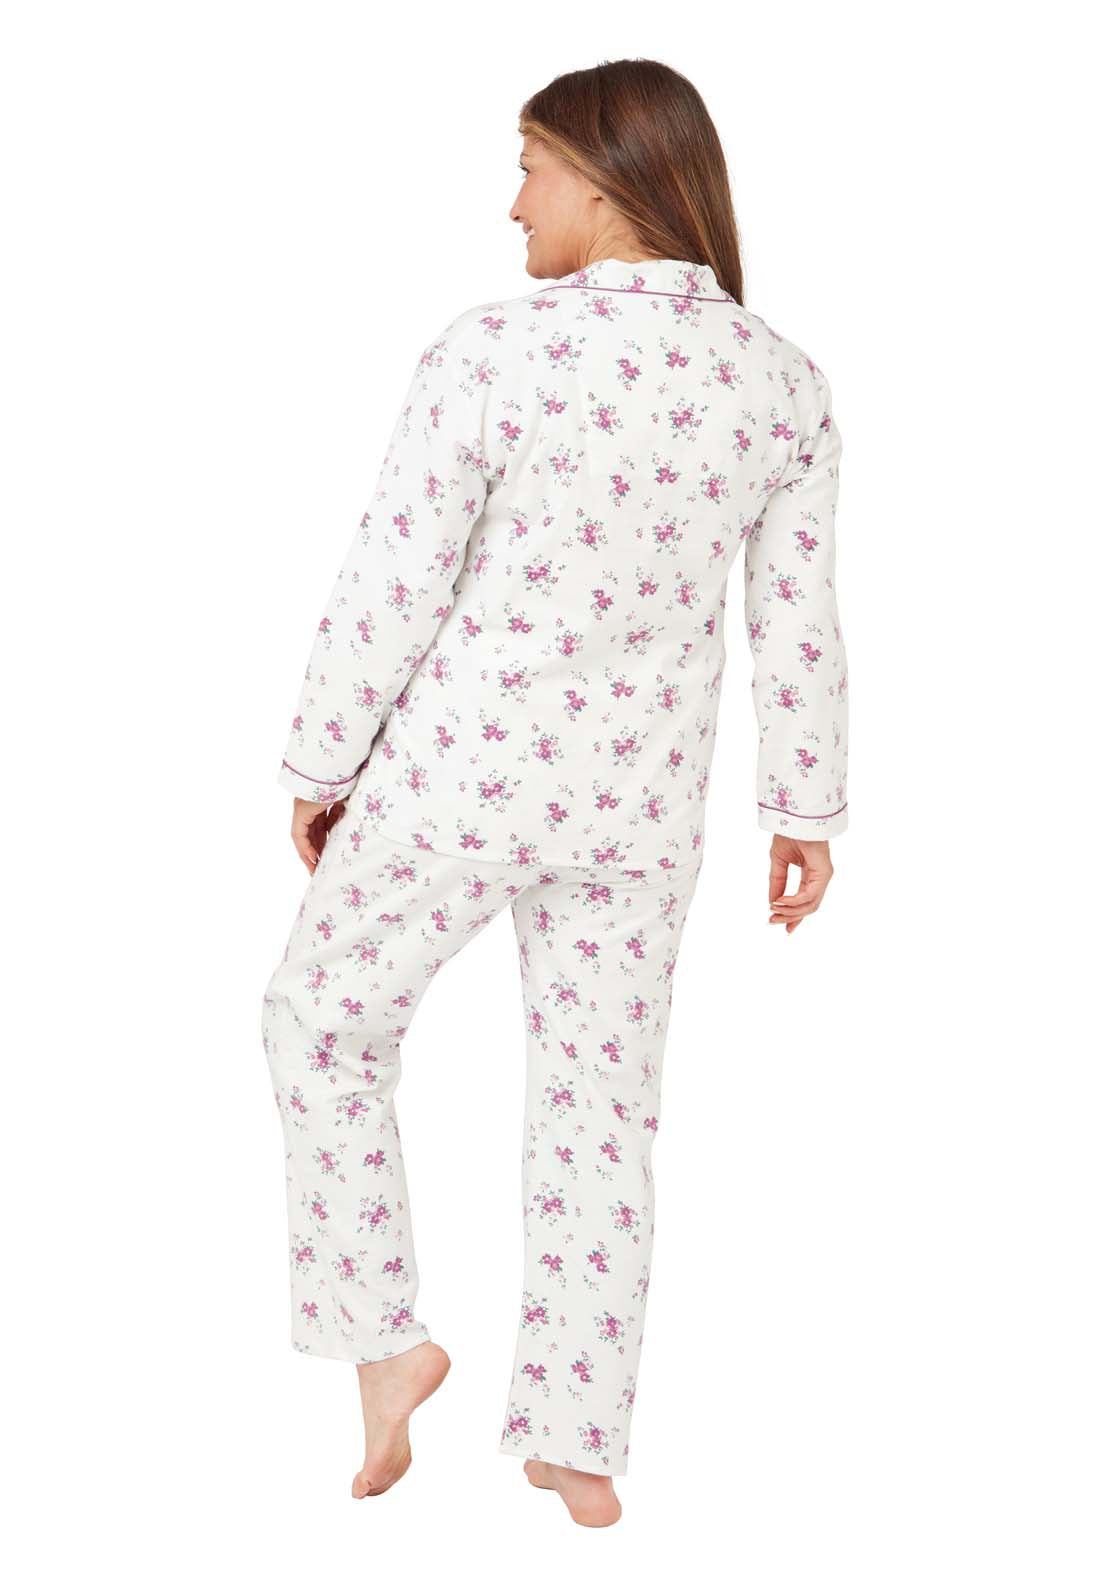 Marlon Polly Floral Wincey Pj - Pink 3 Shaws Department Stores